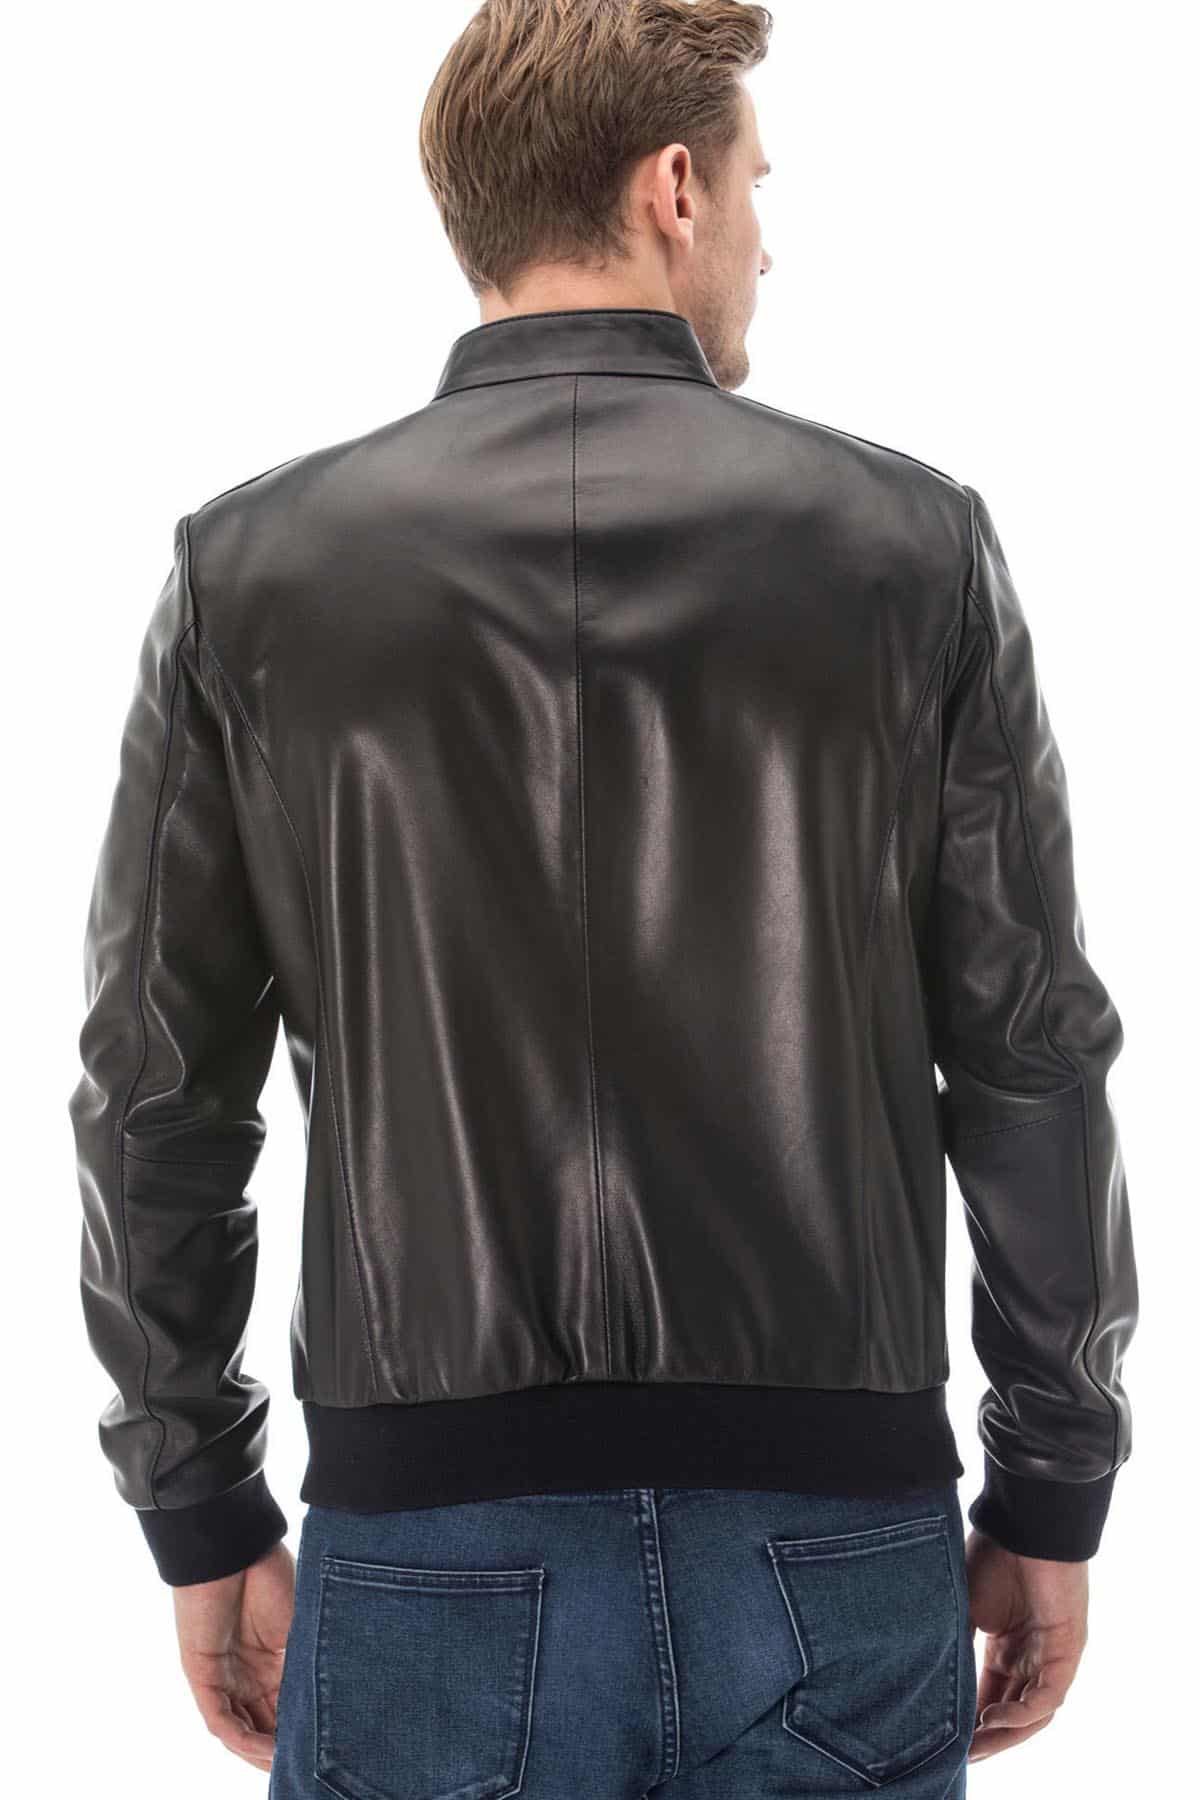 Men's 100 % Real Navy-Blue Leather Printed Jacket